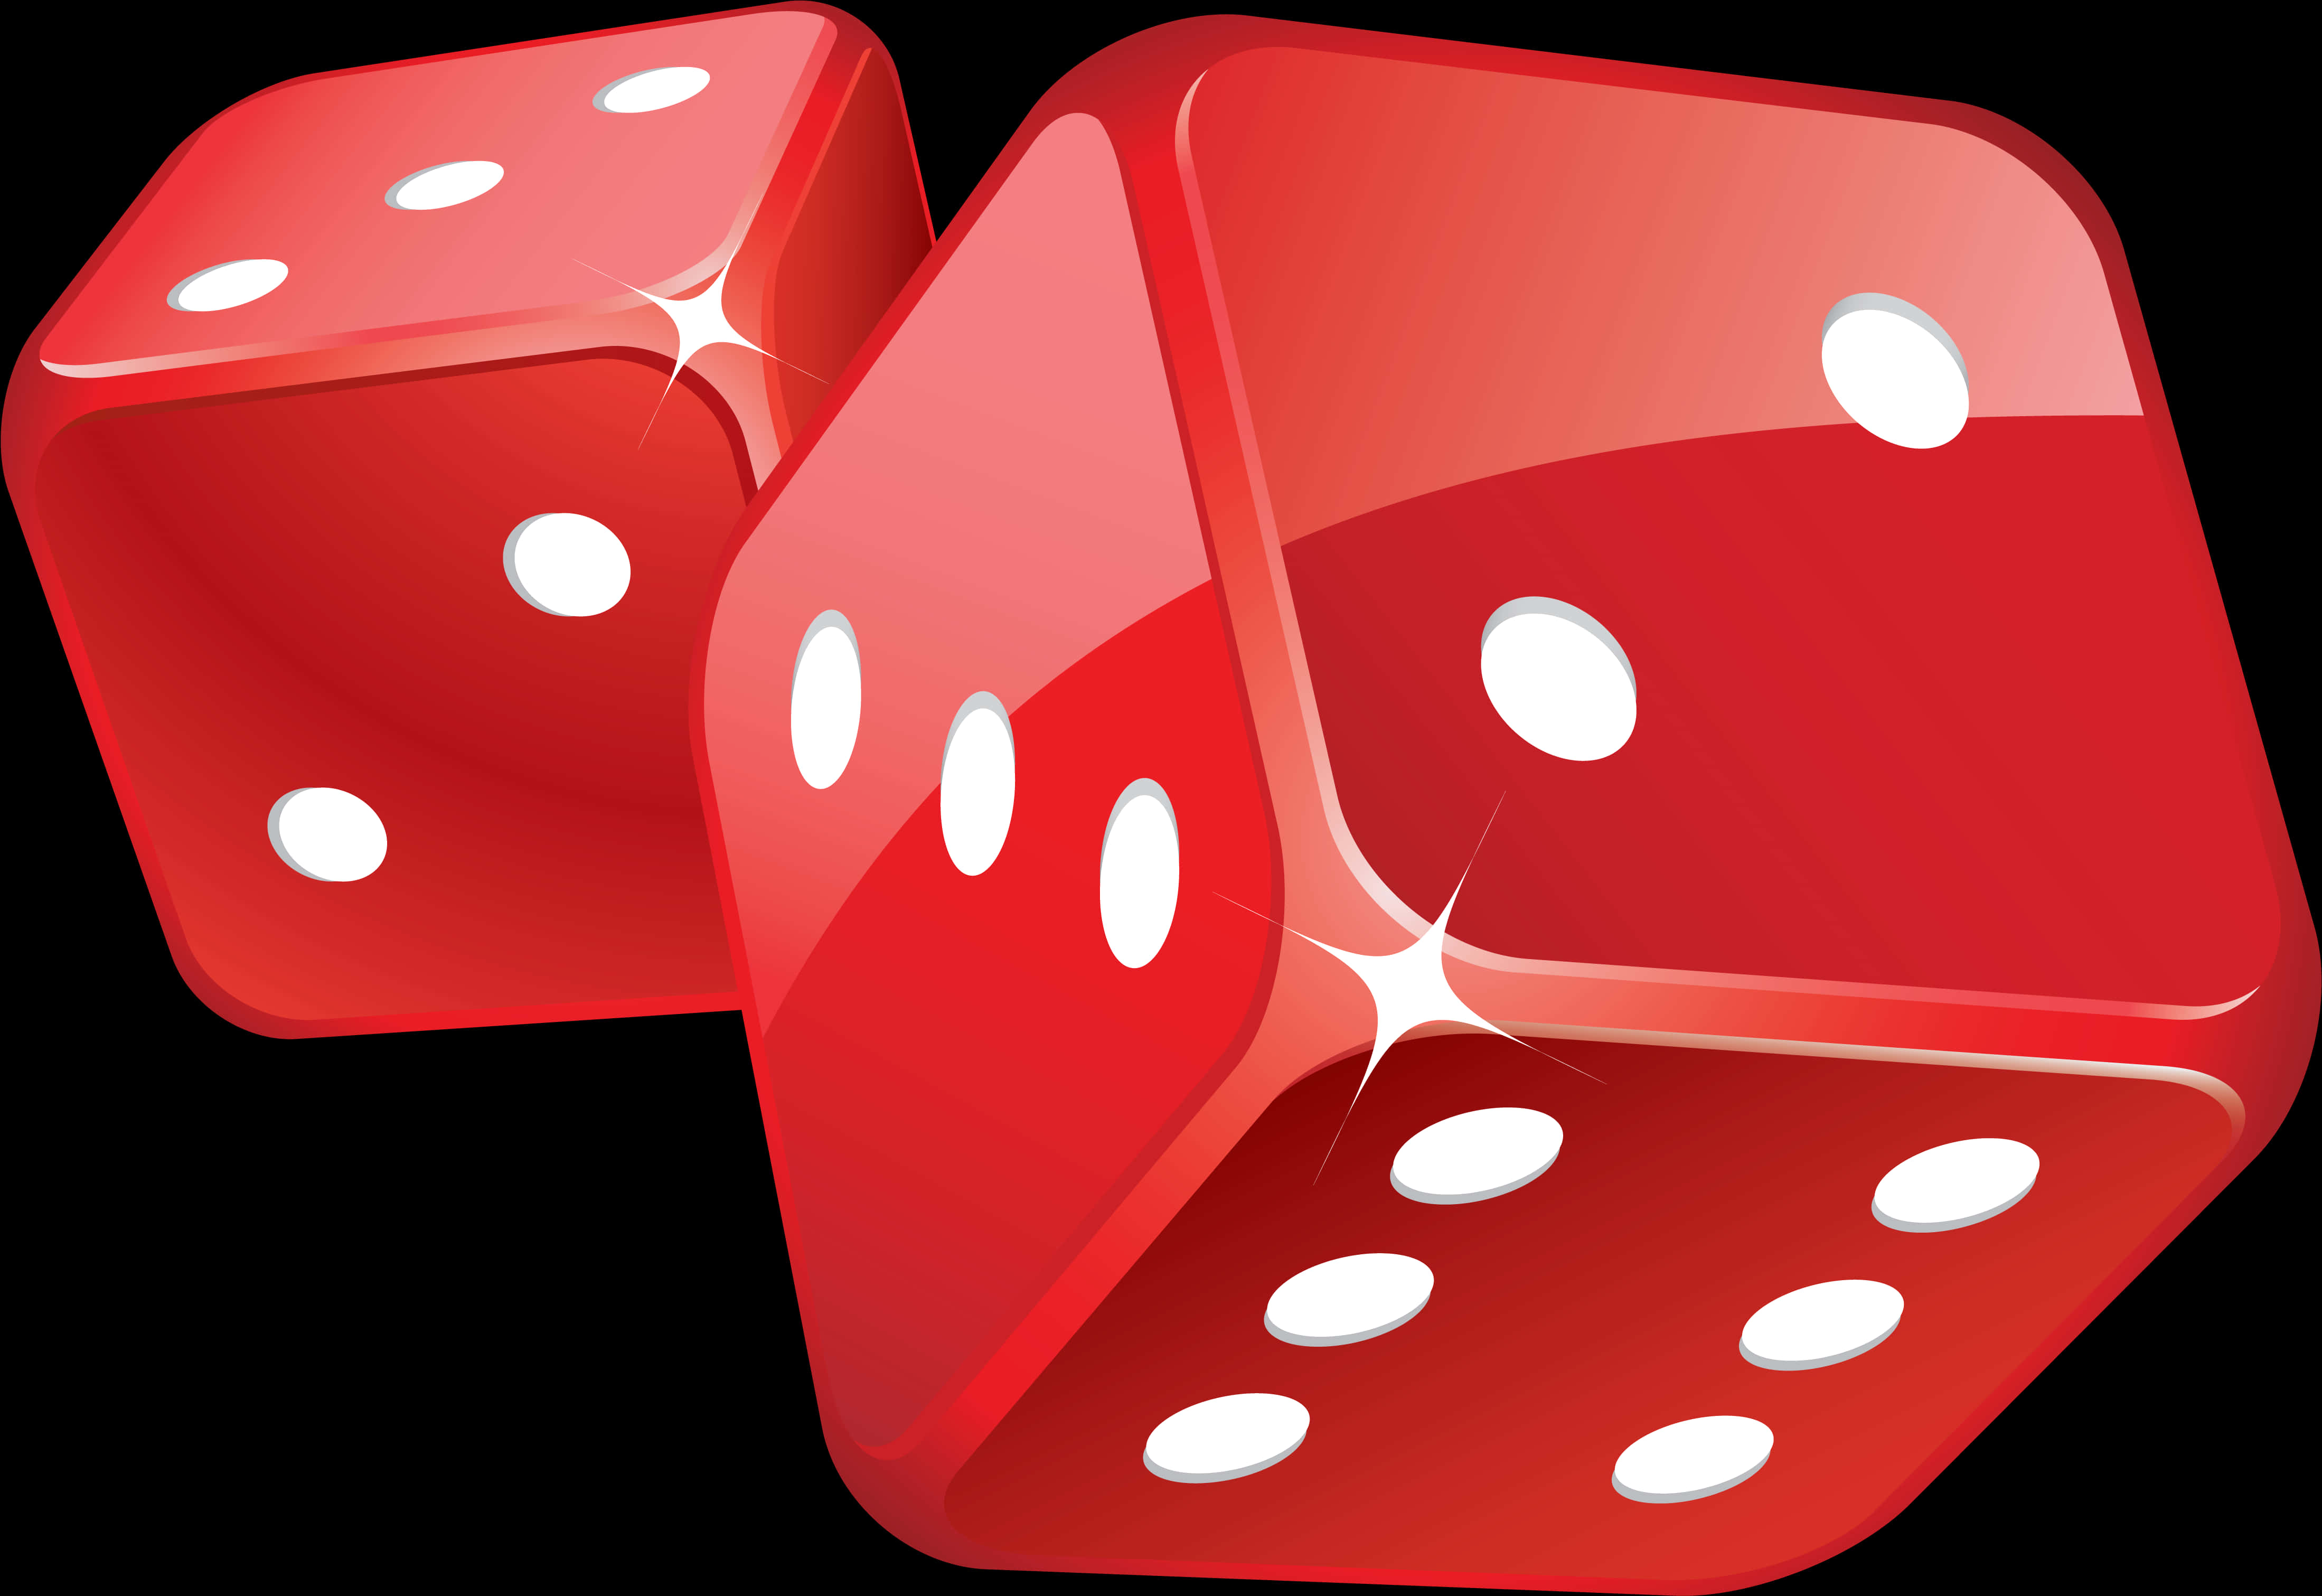 Red Casino Dice Illustration PNG image